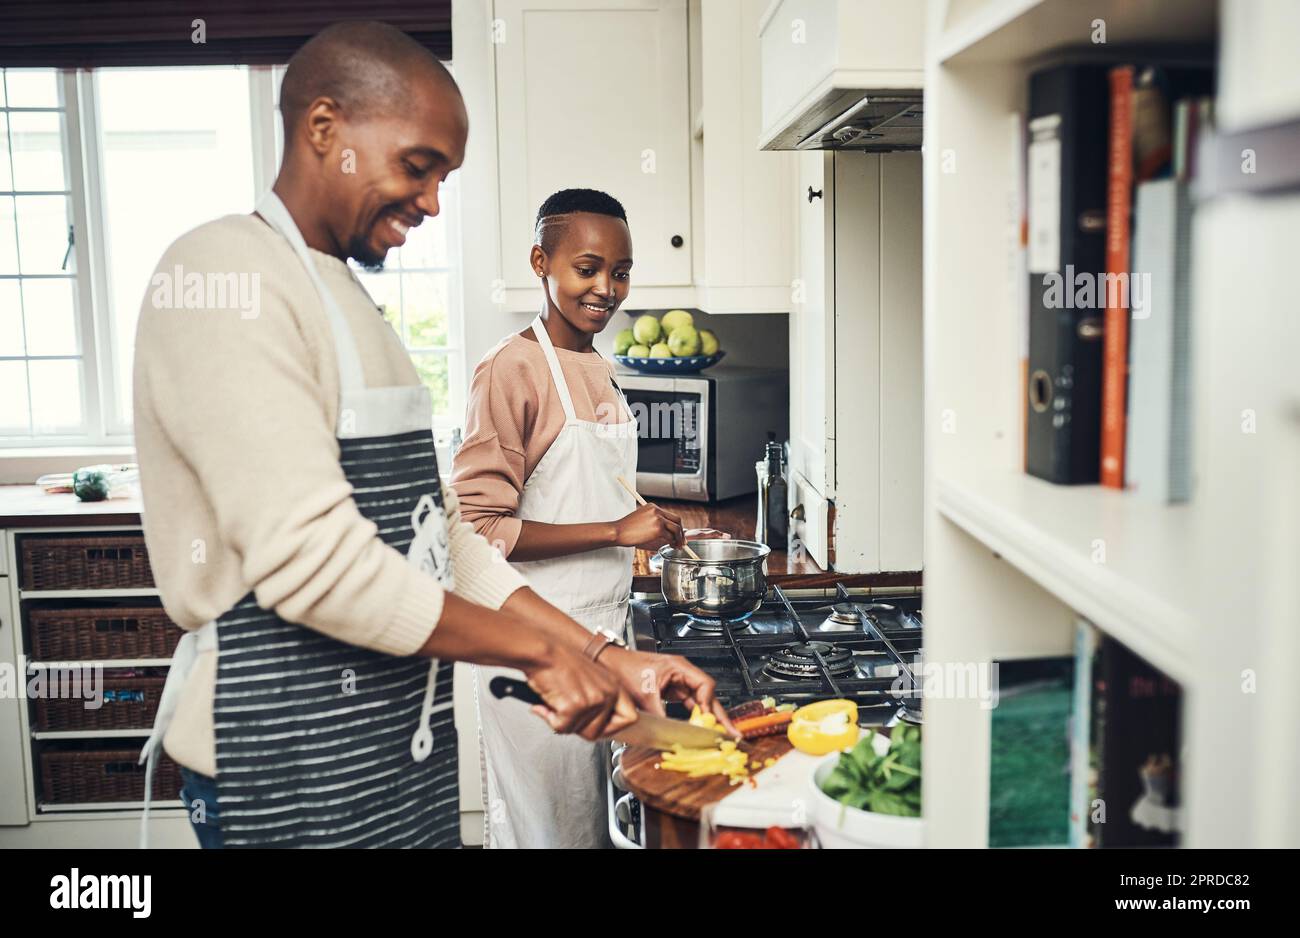 A meal prepared with love is always better. an affectionate young couple preparing dinner in their kitchen. Stock Photo